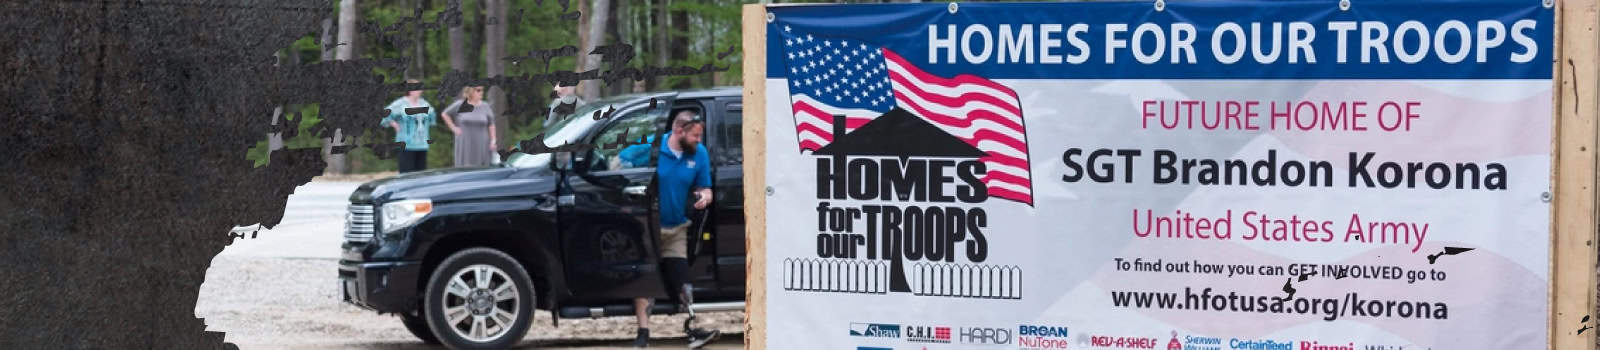 Homes For Our Troops (HFOT)